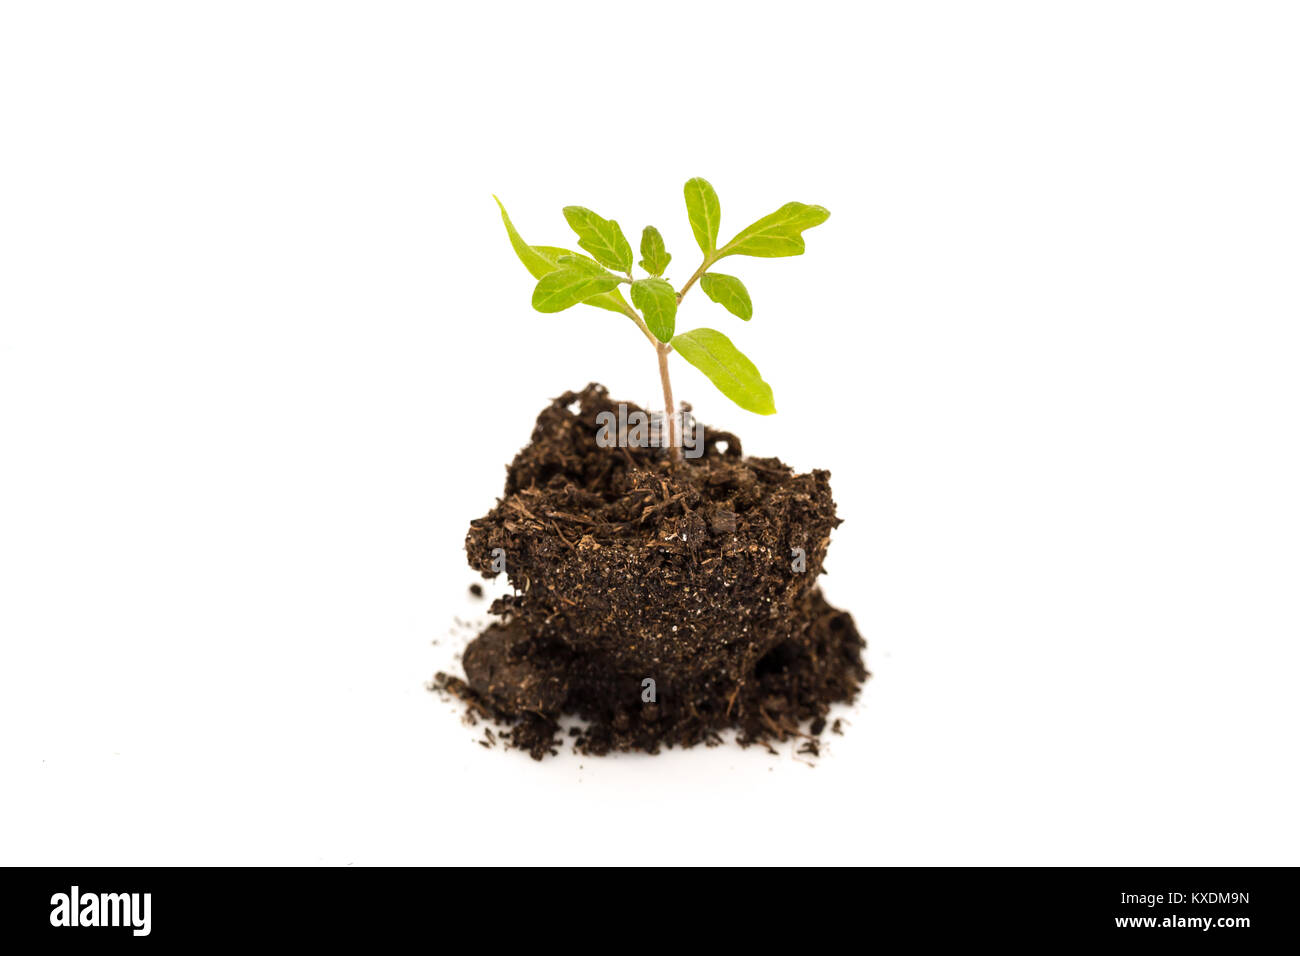 Growing young baby plant isolated on white background, new life, gardening, environment and ecology concept Stock Photo